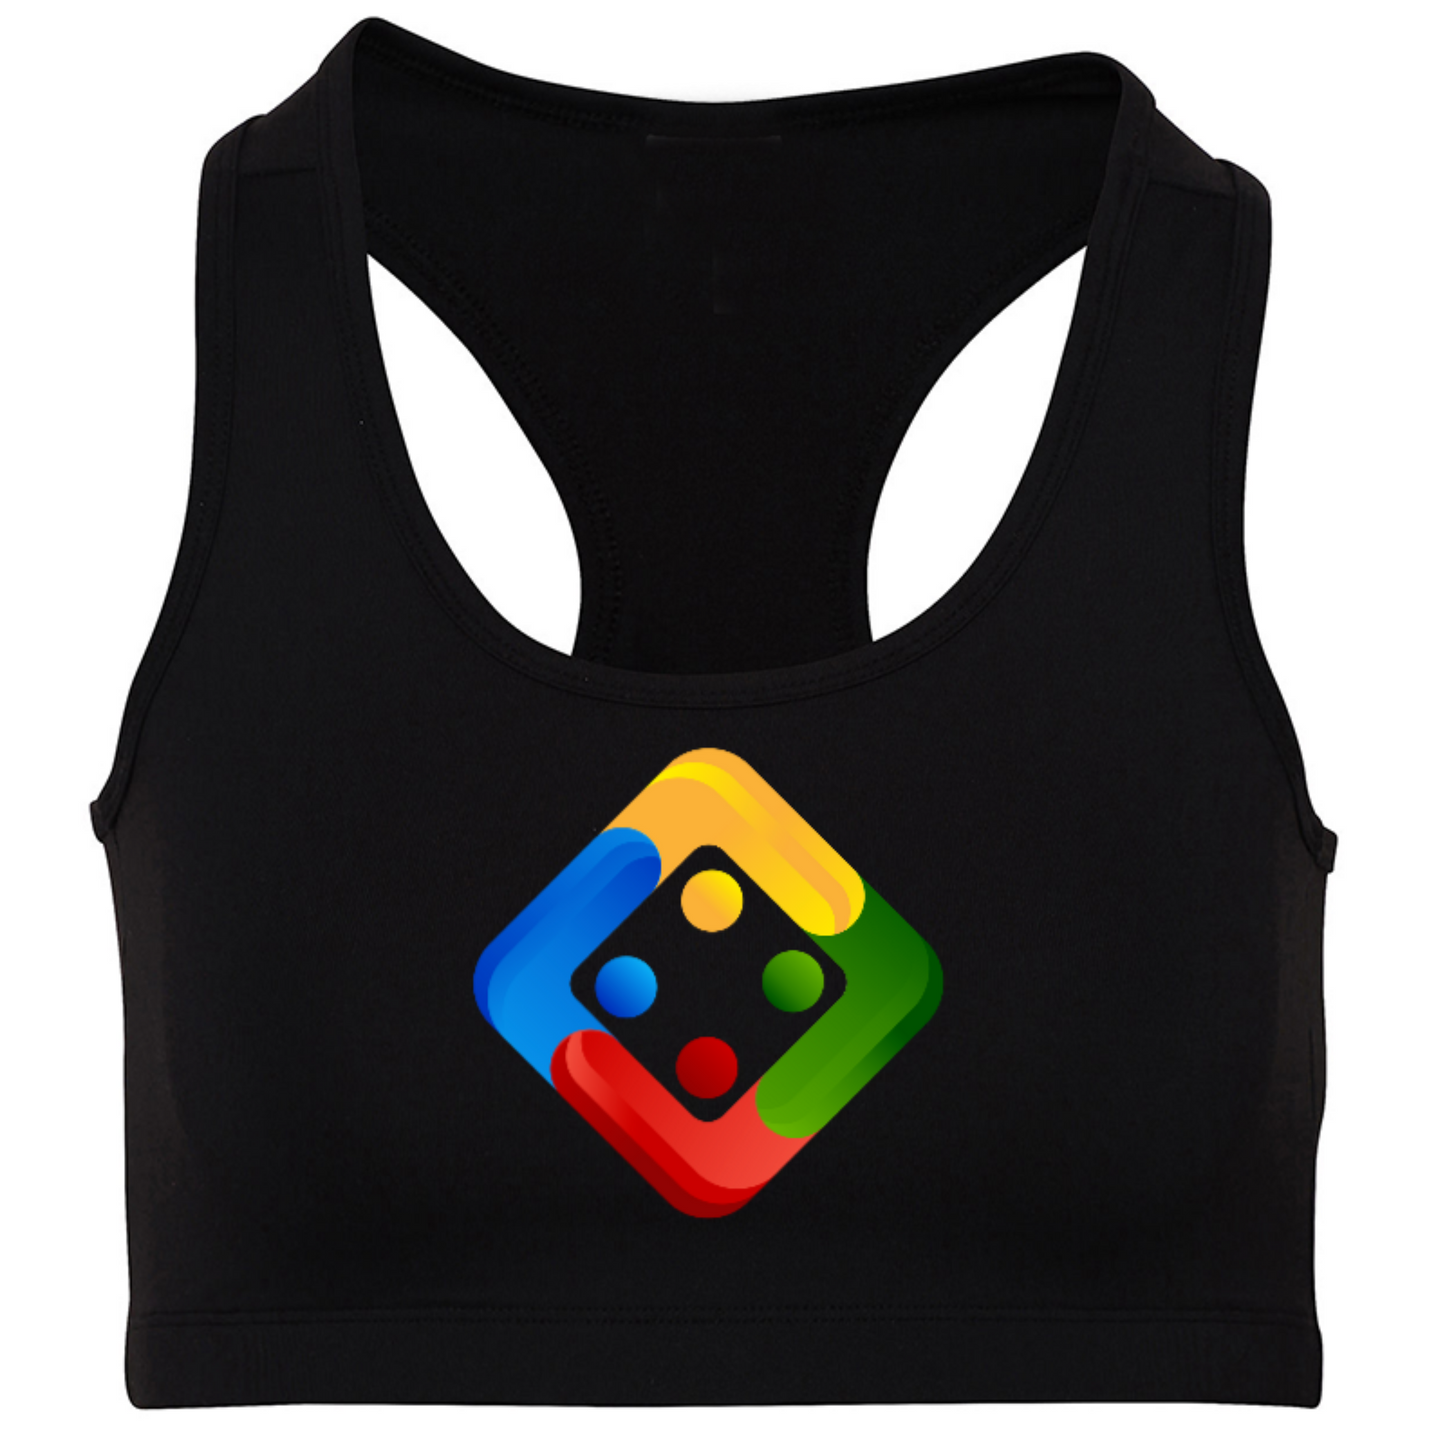 Women's crop top with printed Uckers emblem. Available in 4 colours.